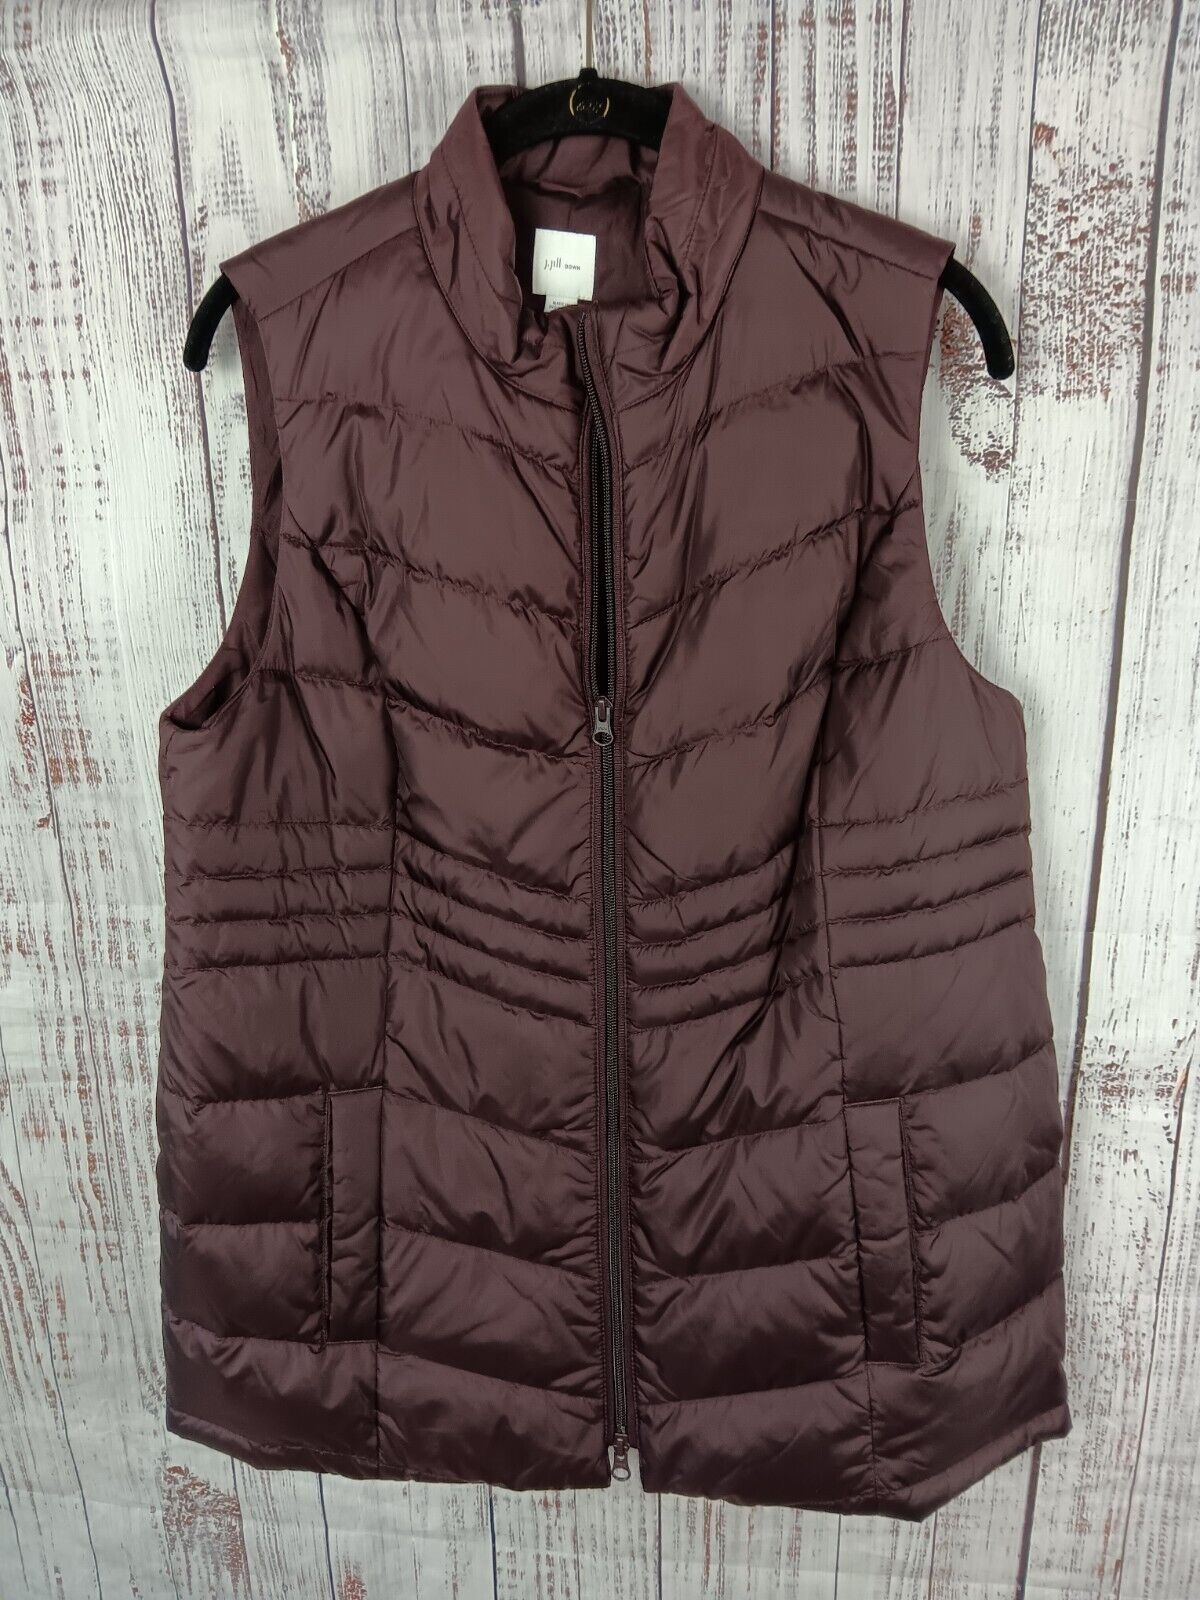 J. Jill Puffer Vest Women's M/P Quilted Down Fill… - image 1